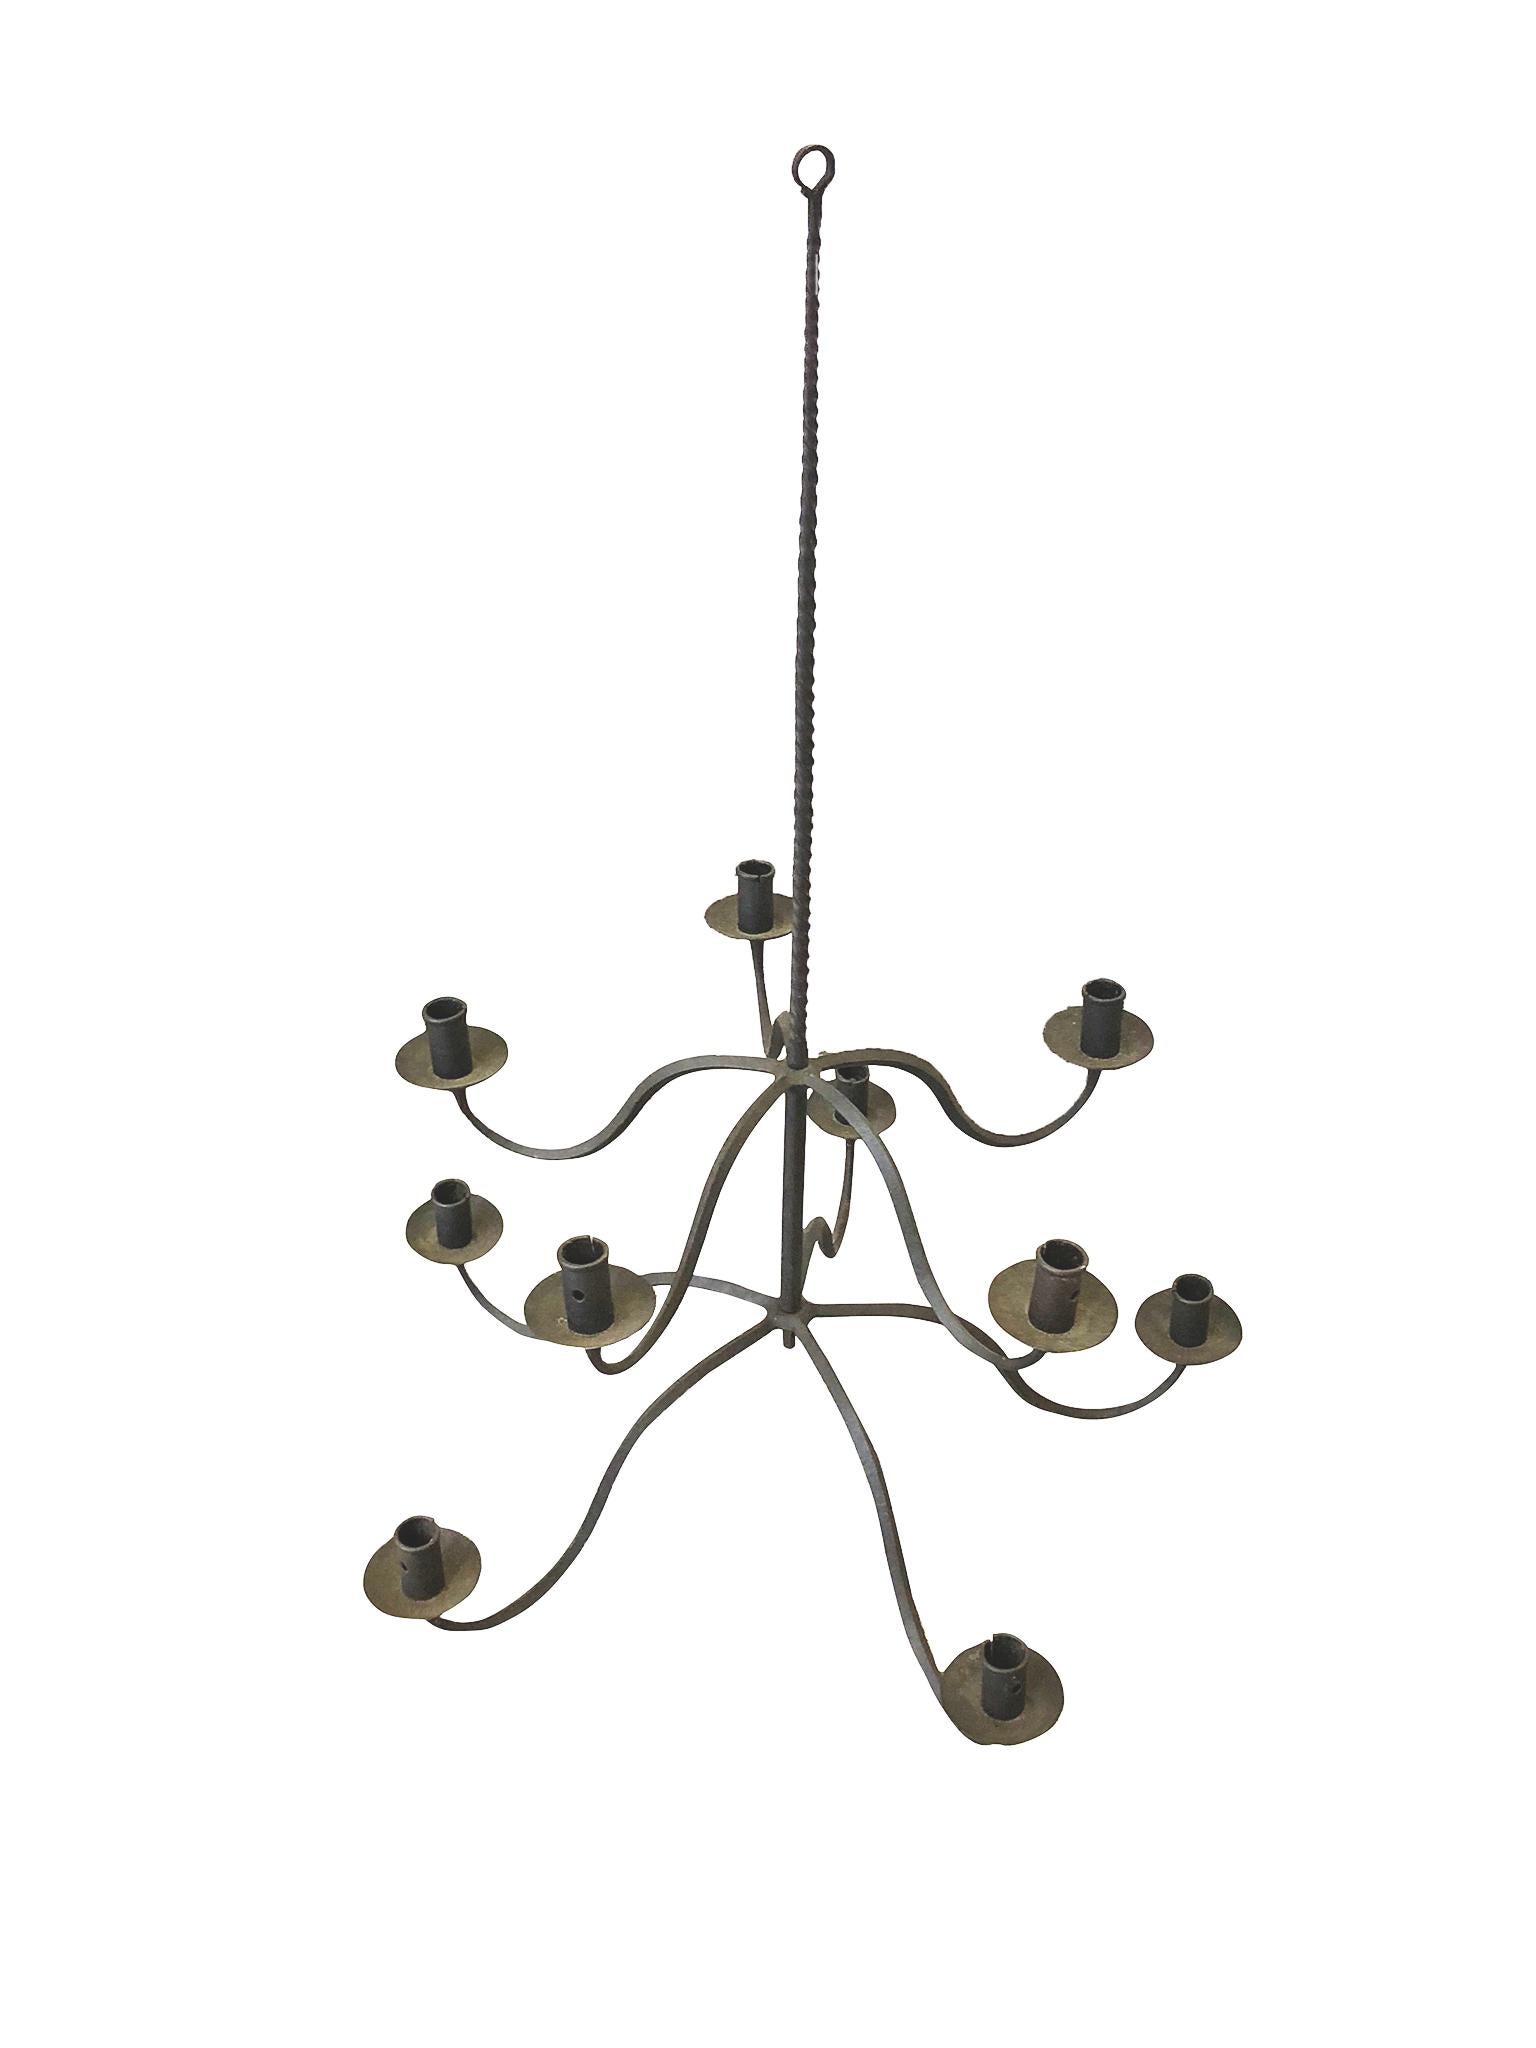 A simple, Spanish style hand forged candelabra, late 19th century. Two-tiered, with each tier comprising of 5 arms that curve down and up to the candle pans and holders. Long wrought iron stem.

Dimensions:
24 in. diameter
36 in. height.